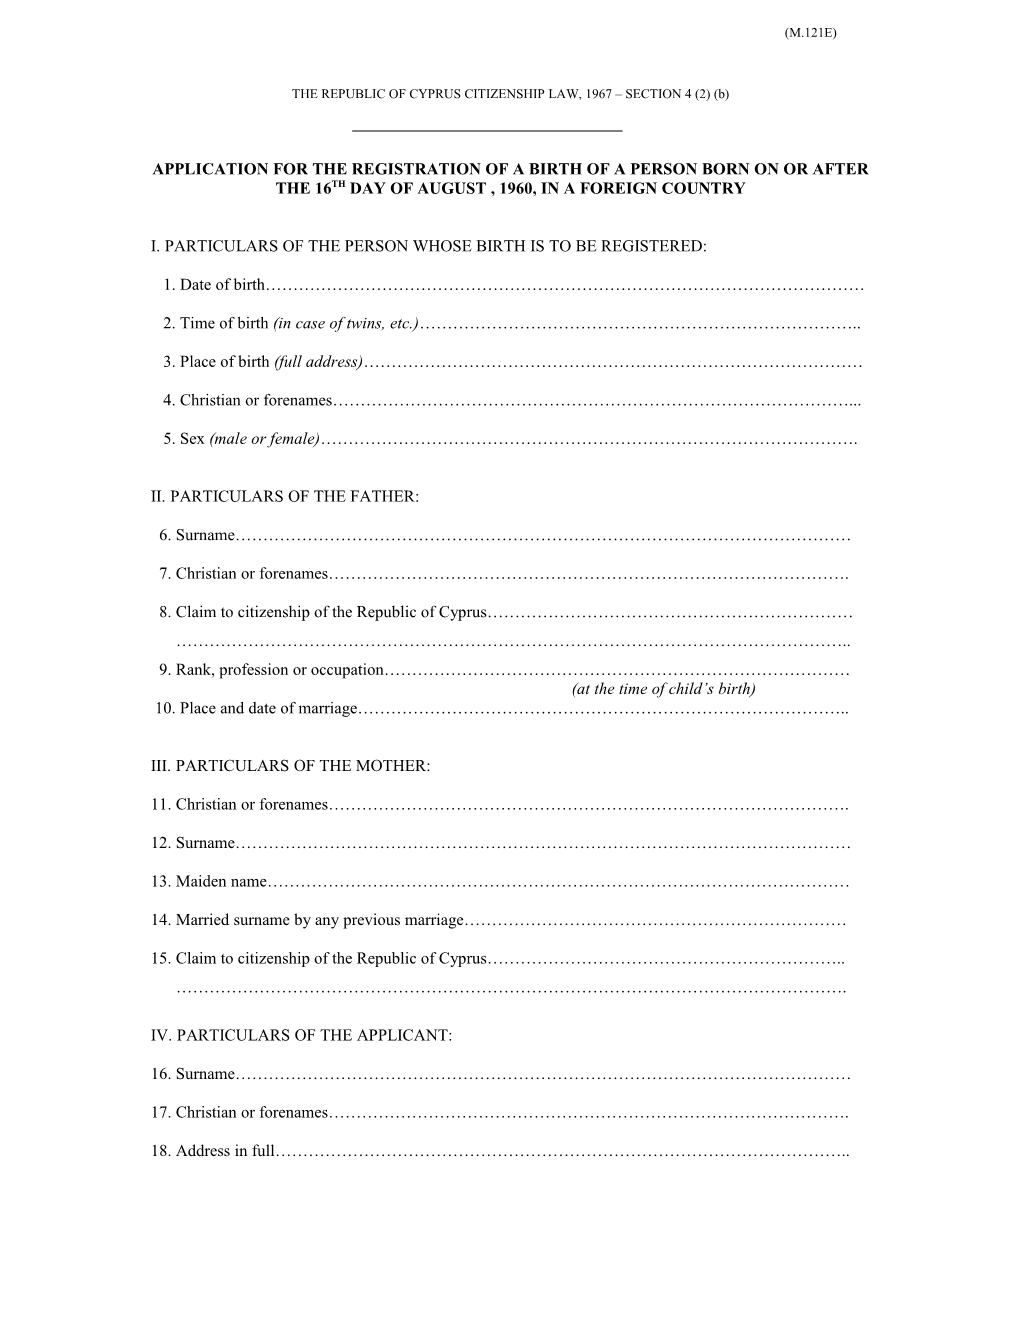 Application for the Registration of a Birth of a Person Born on Or After